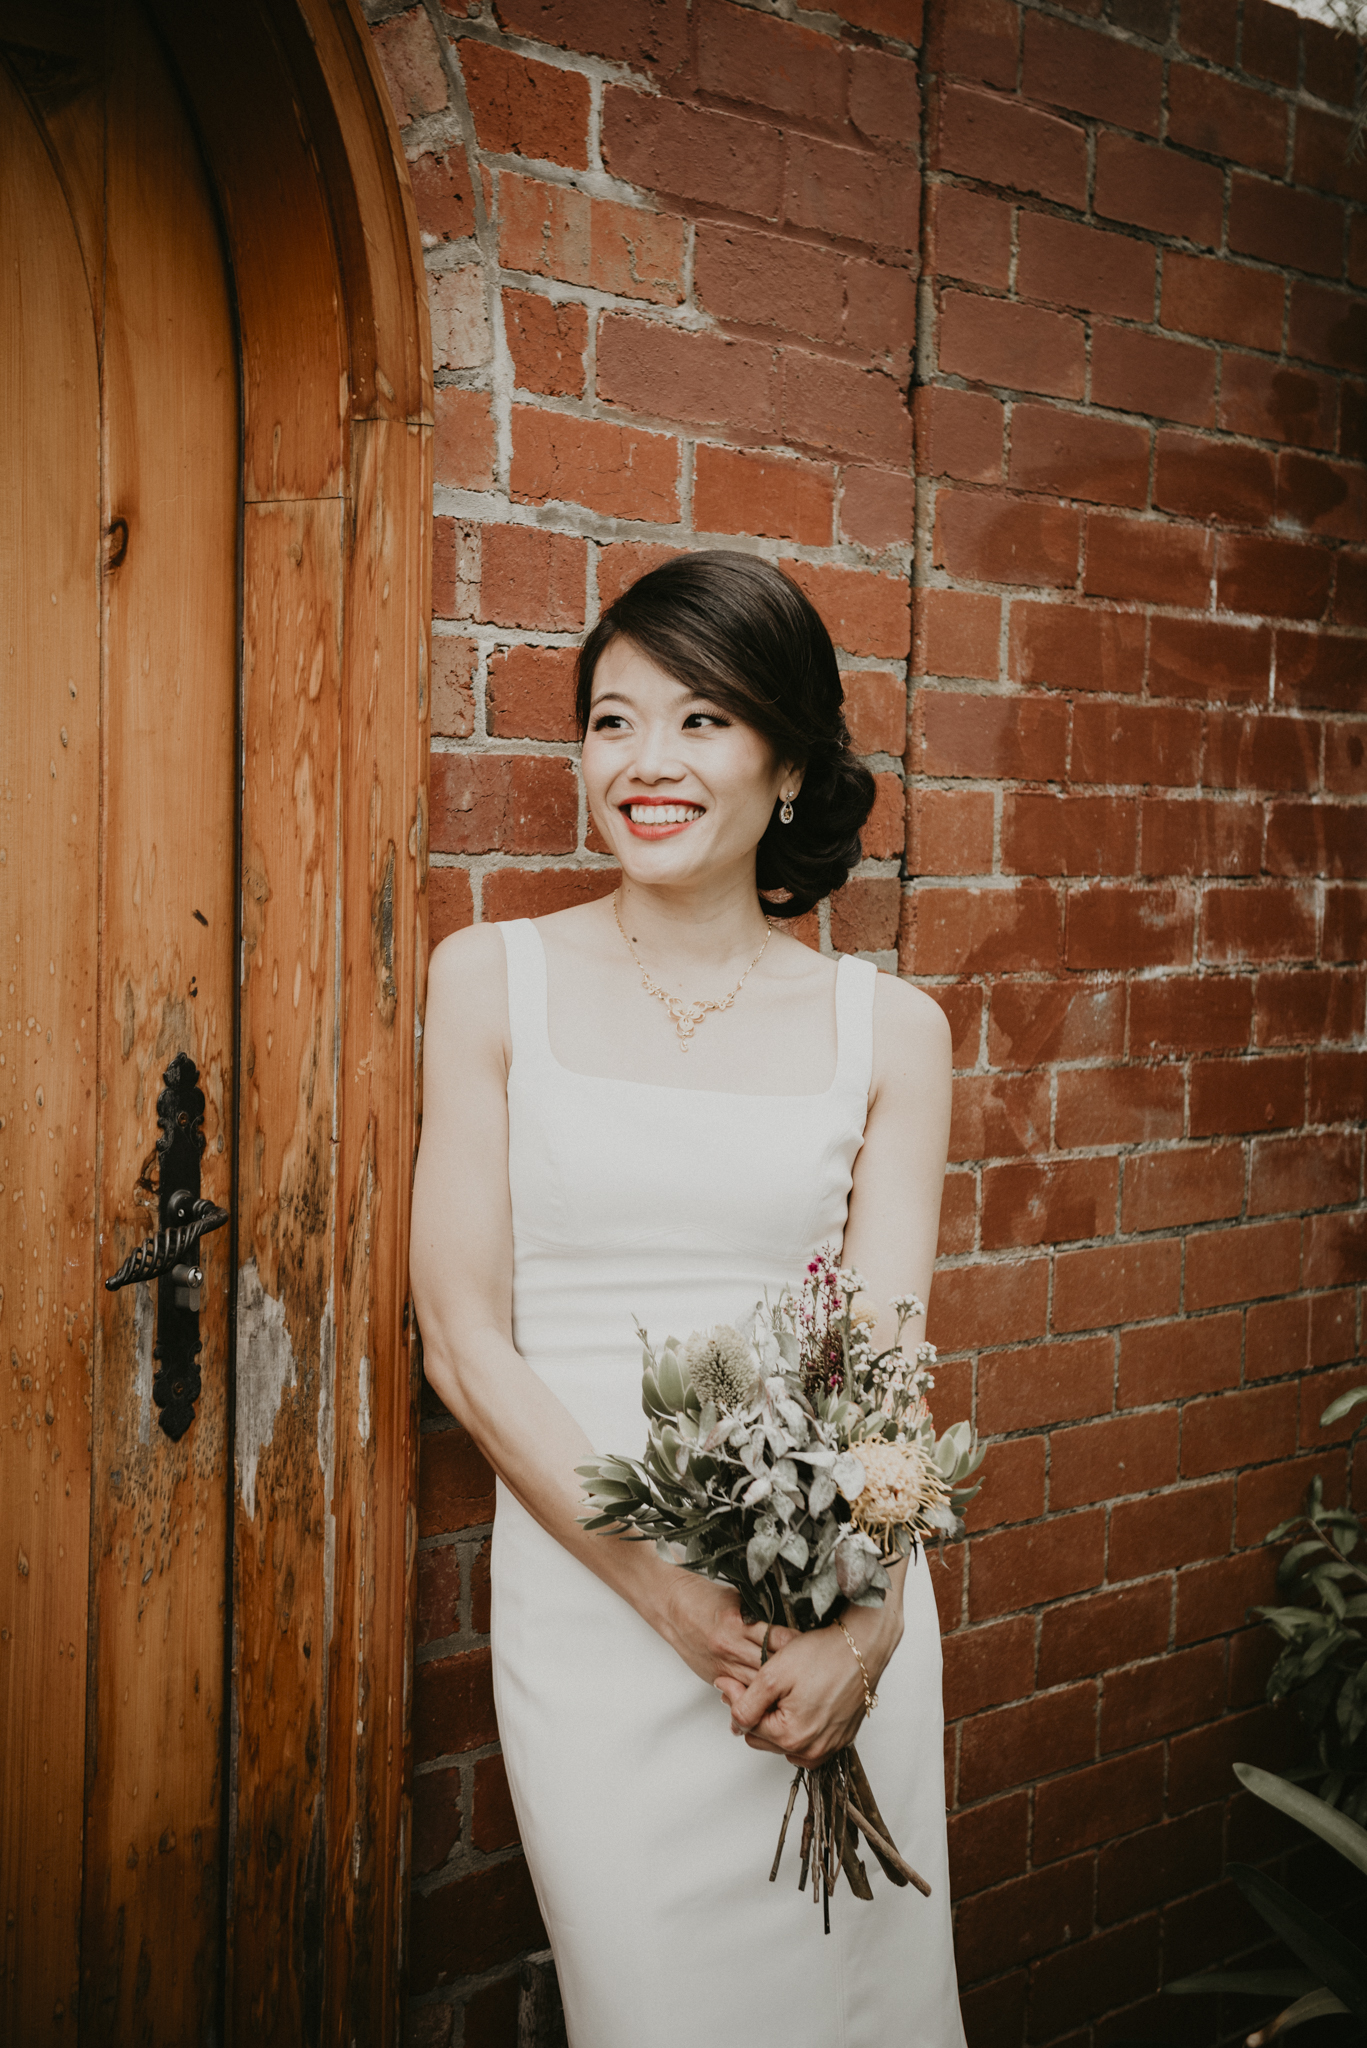 agnes-duy-15th-december-2018-chinese-vietnamese-wedding-tea-ceremony-yarraville-home-house-documentary-candid-photographer-sarah-matler-photography-99